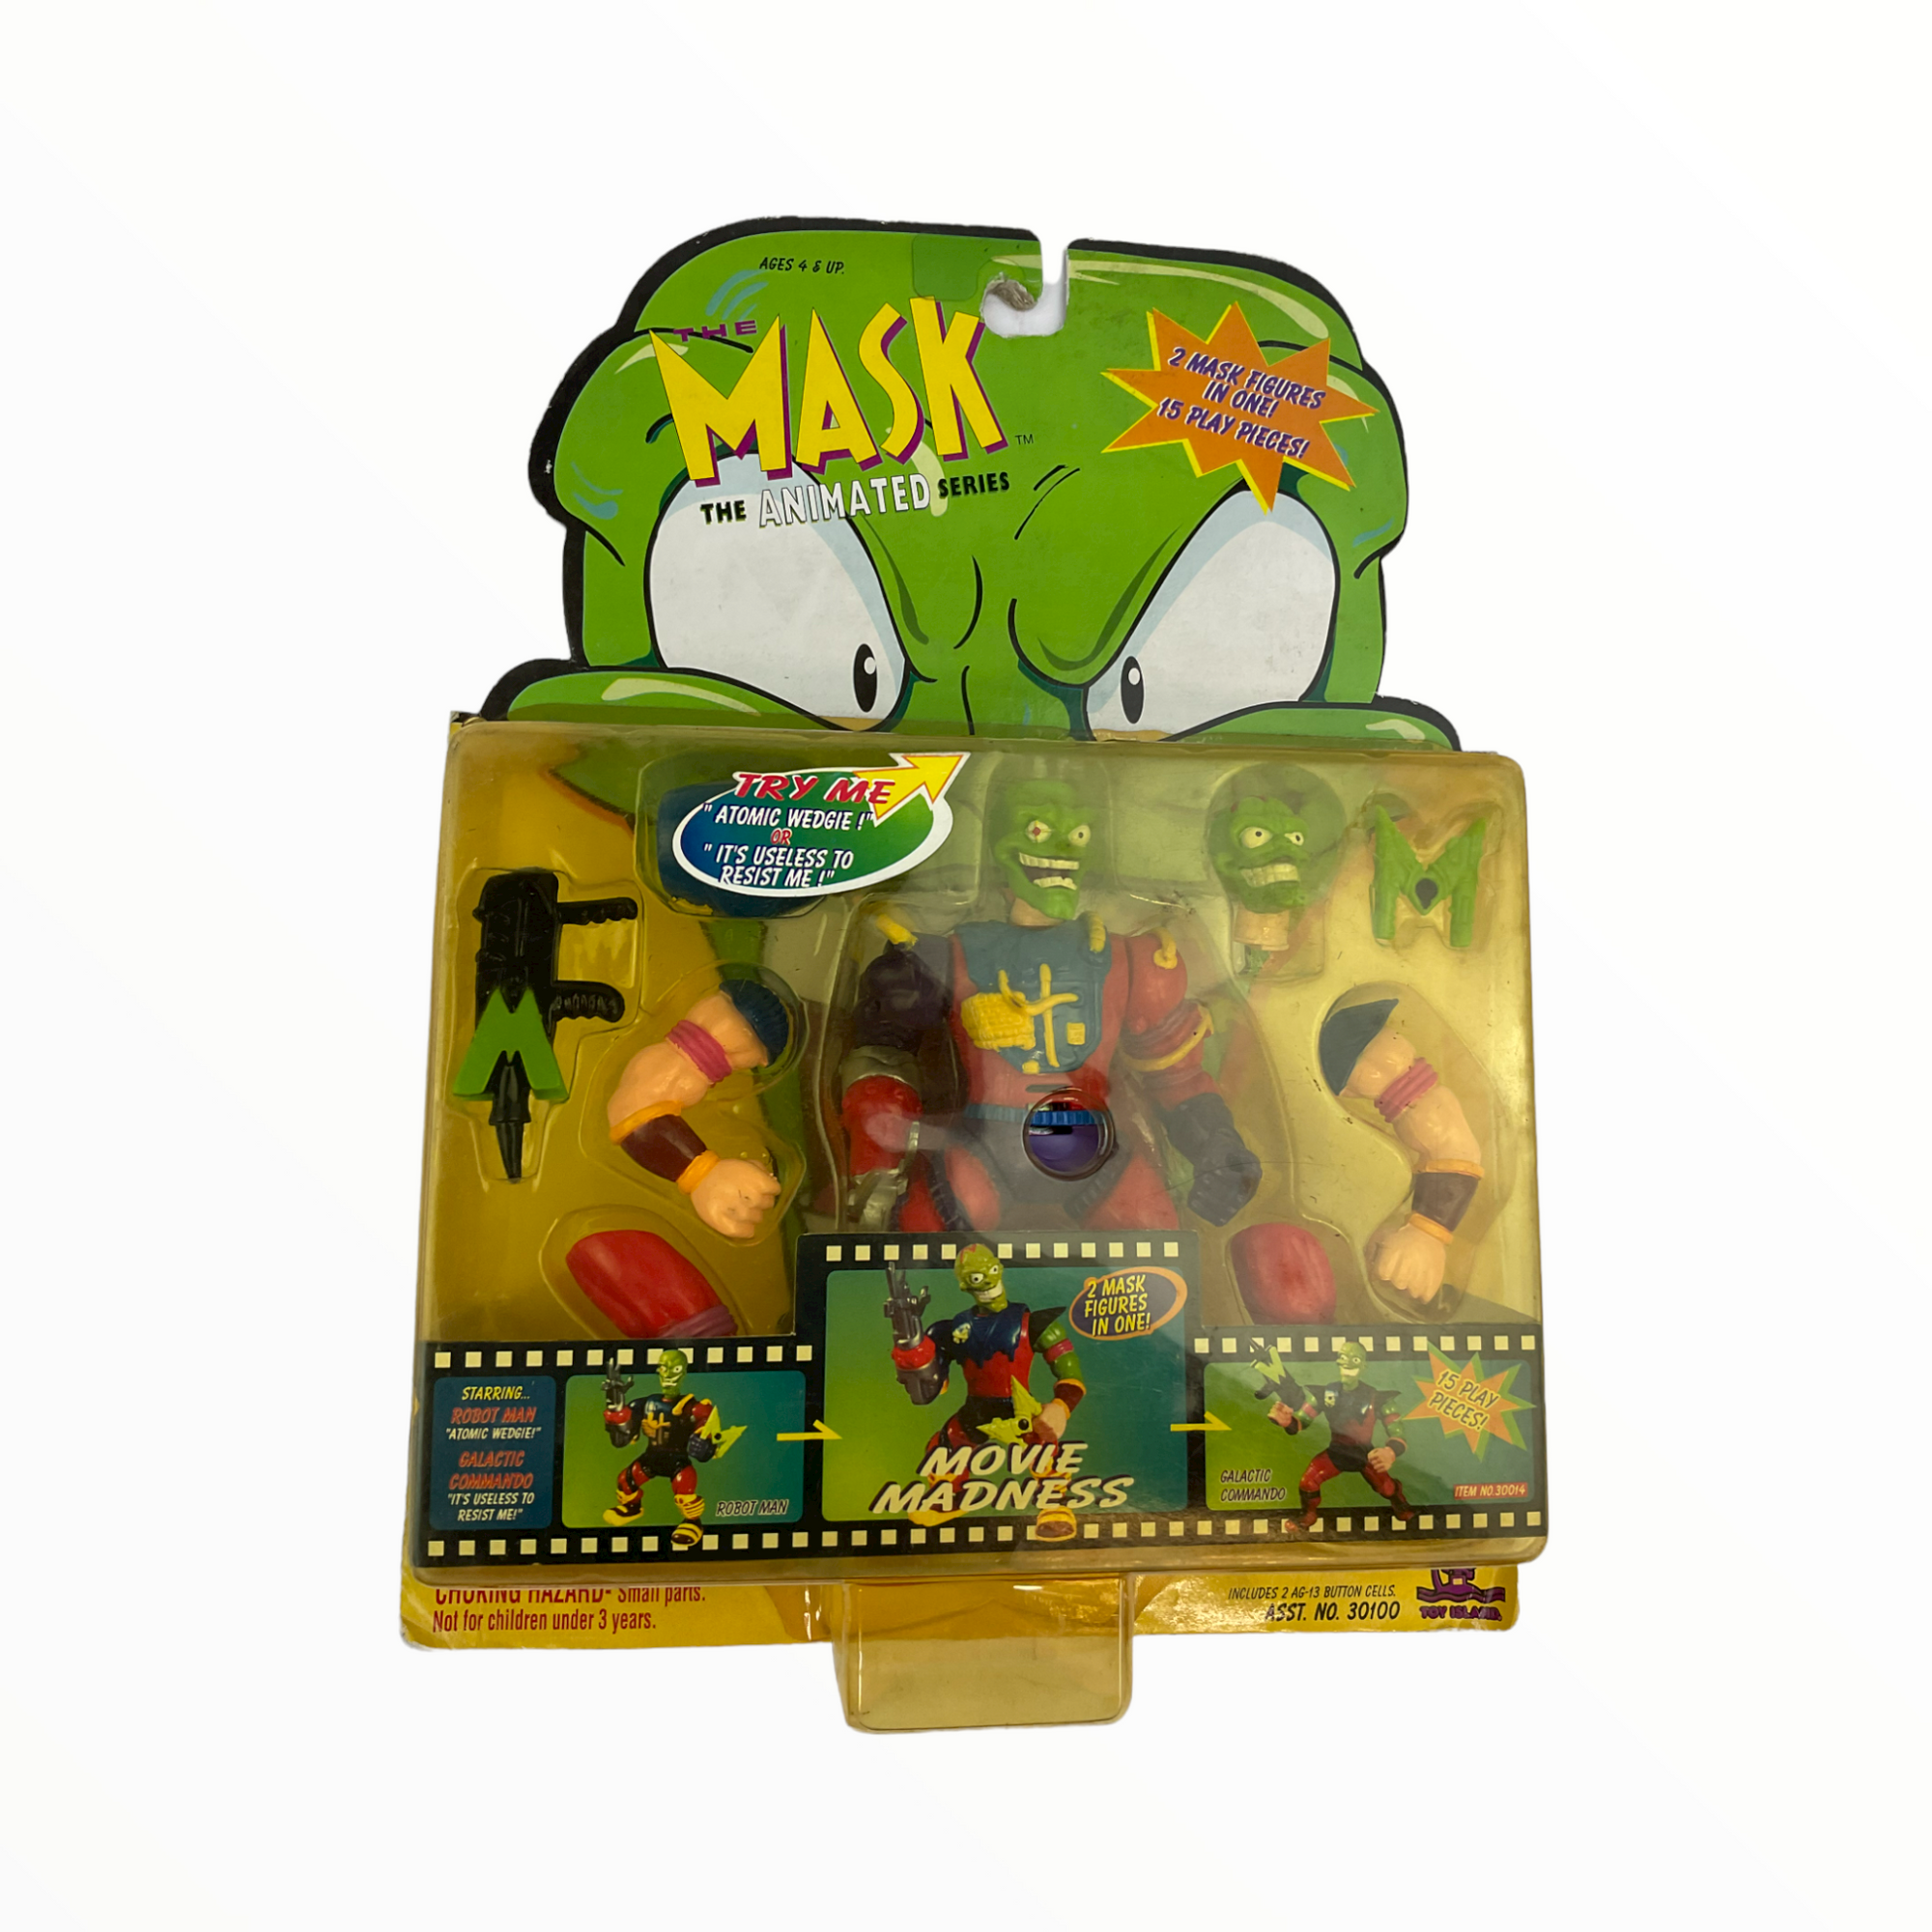 The Mask The animated series Robot Man